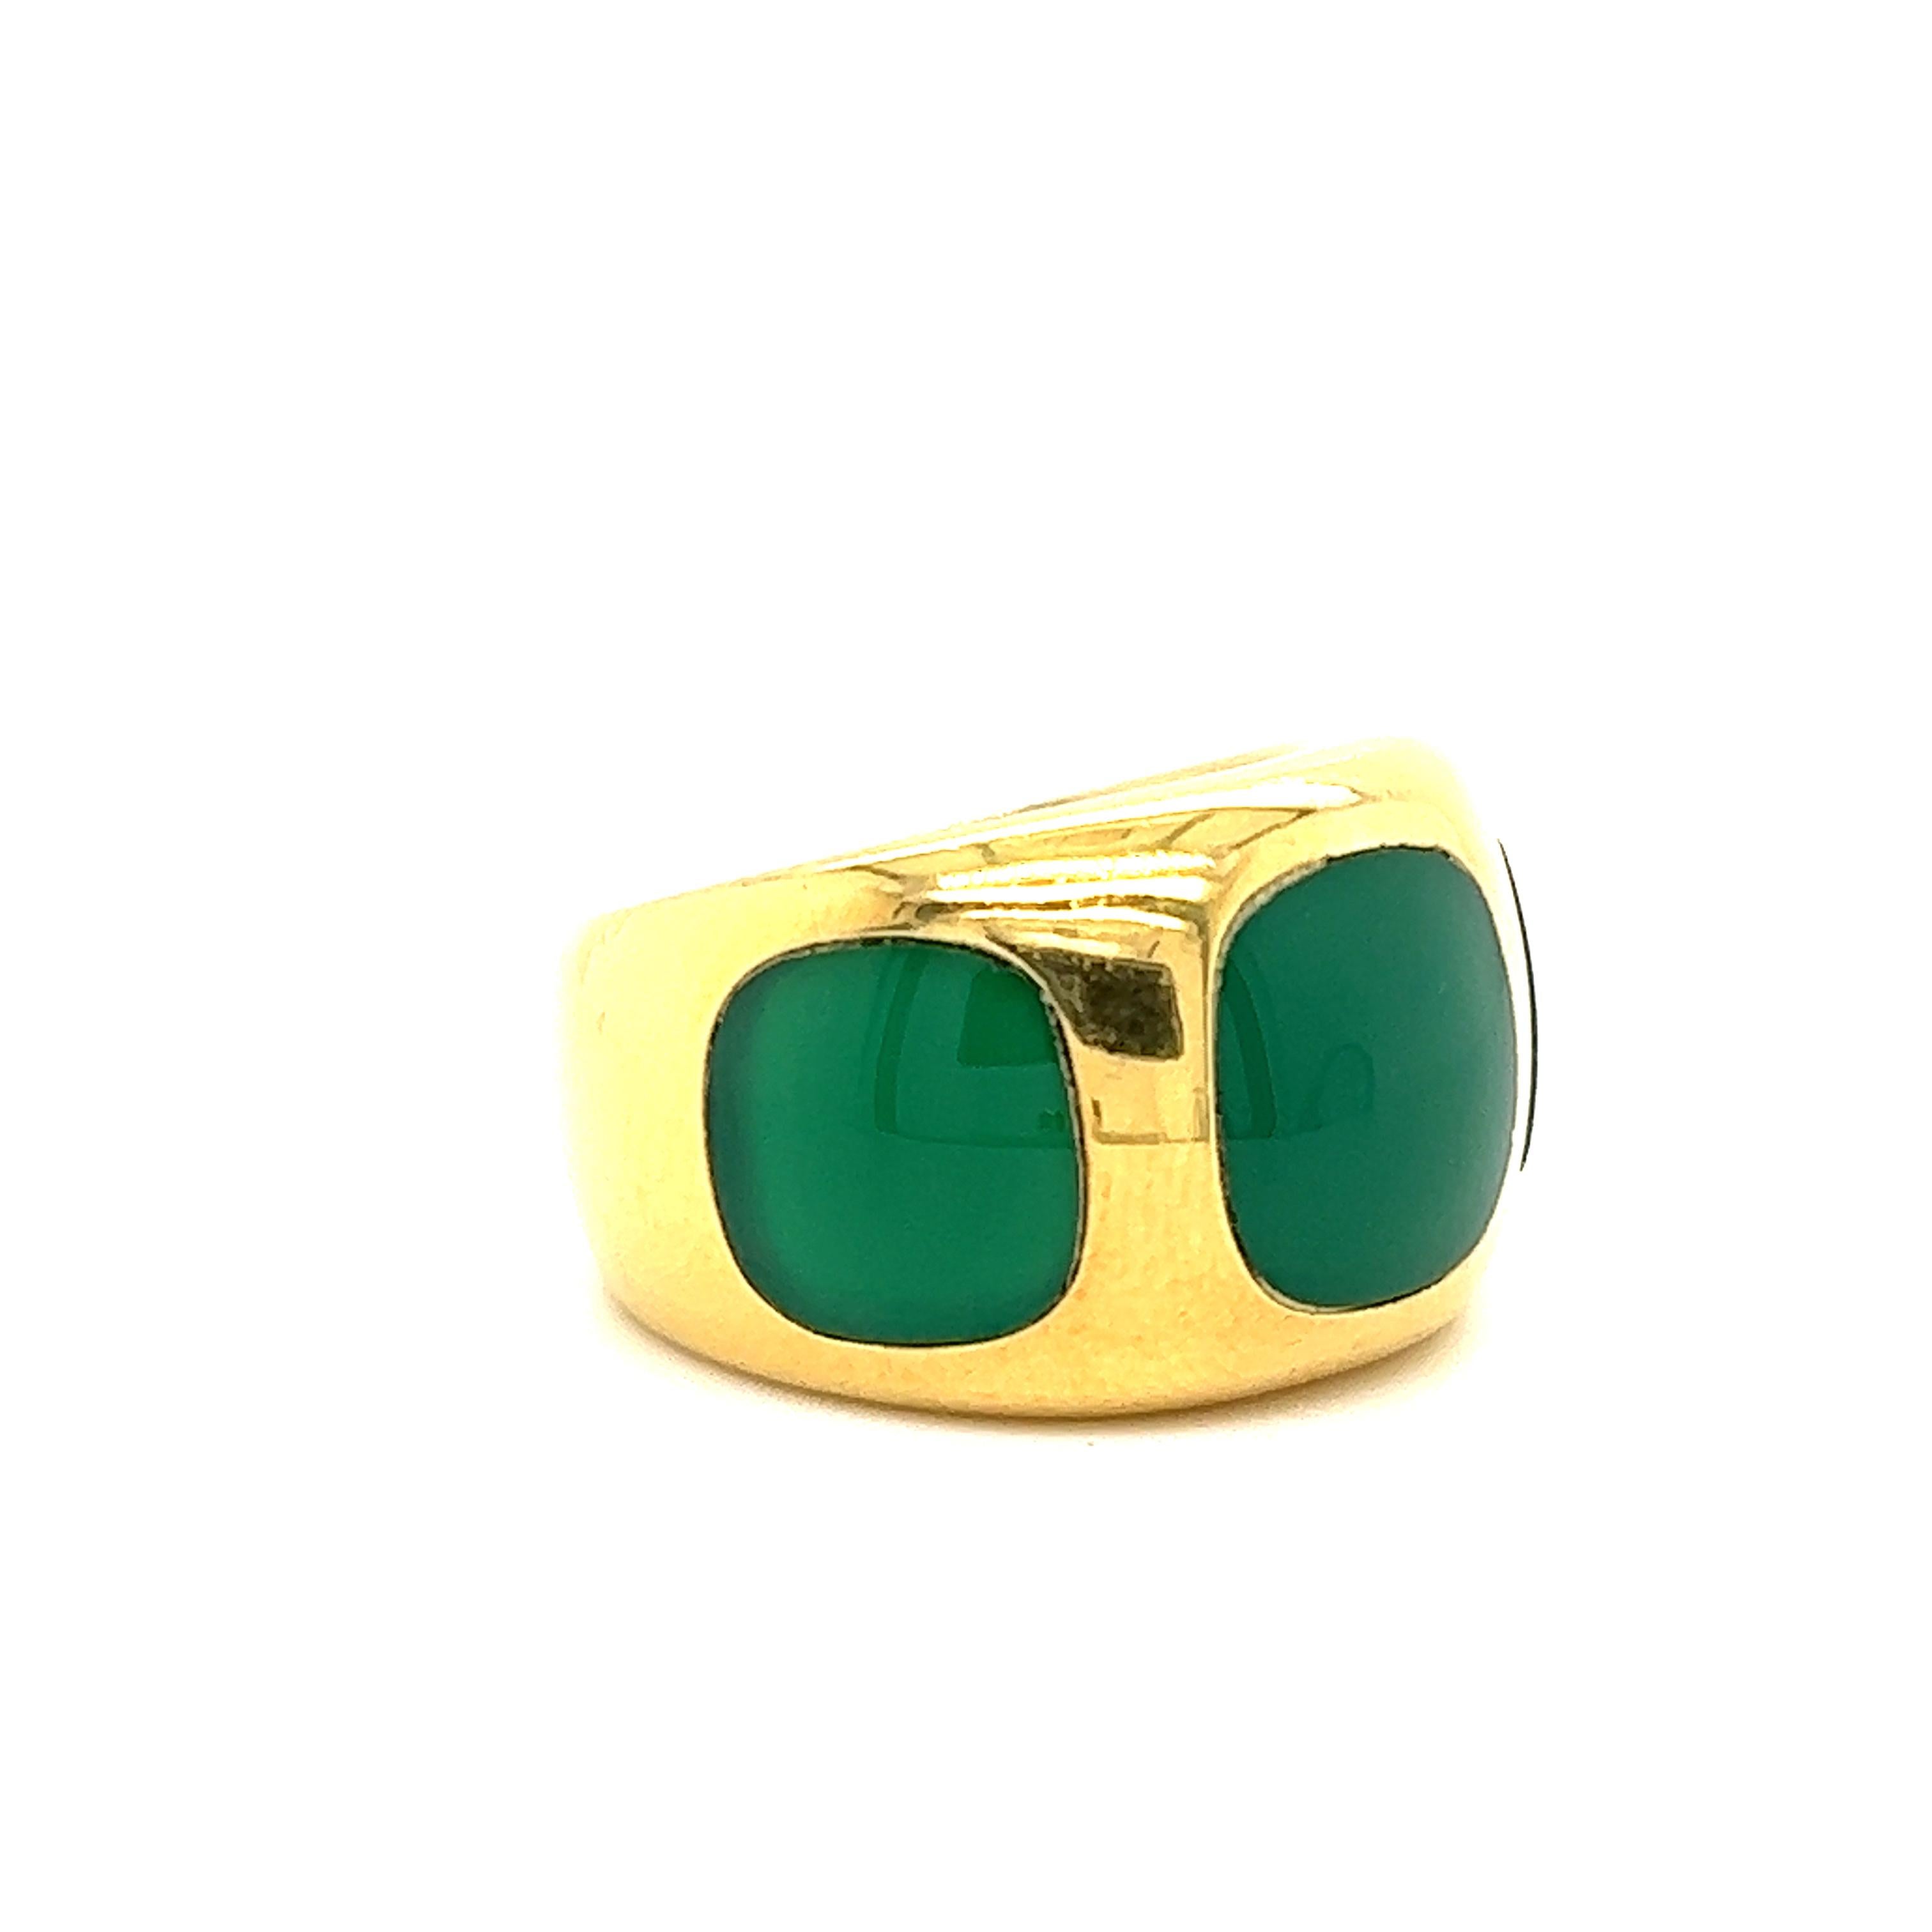 Fantastic design crafted in 18k yellow gold. The ring highlights three chrysoprase gemstones that display a gorgeous green color. The ring is a wide band design that shows a 14 mm top half and tapers down to 8.5 mm at the base of band. The gemstones